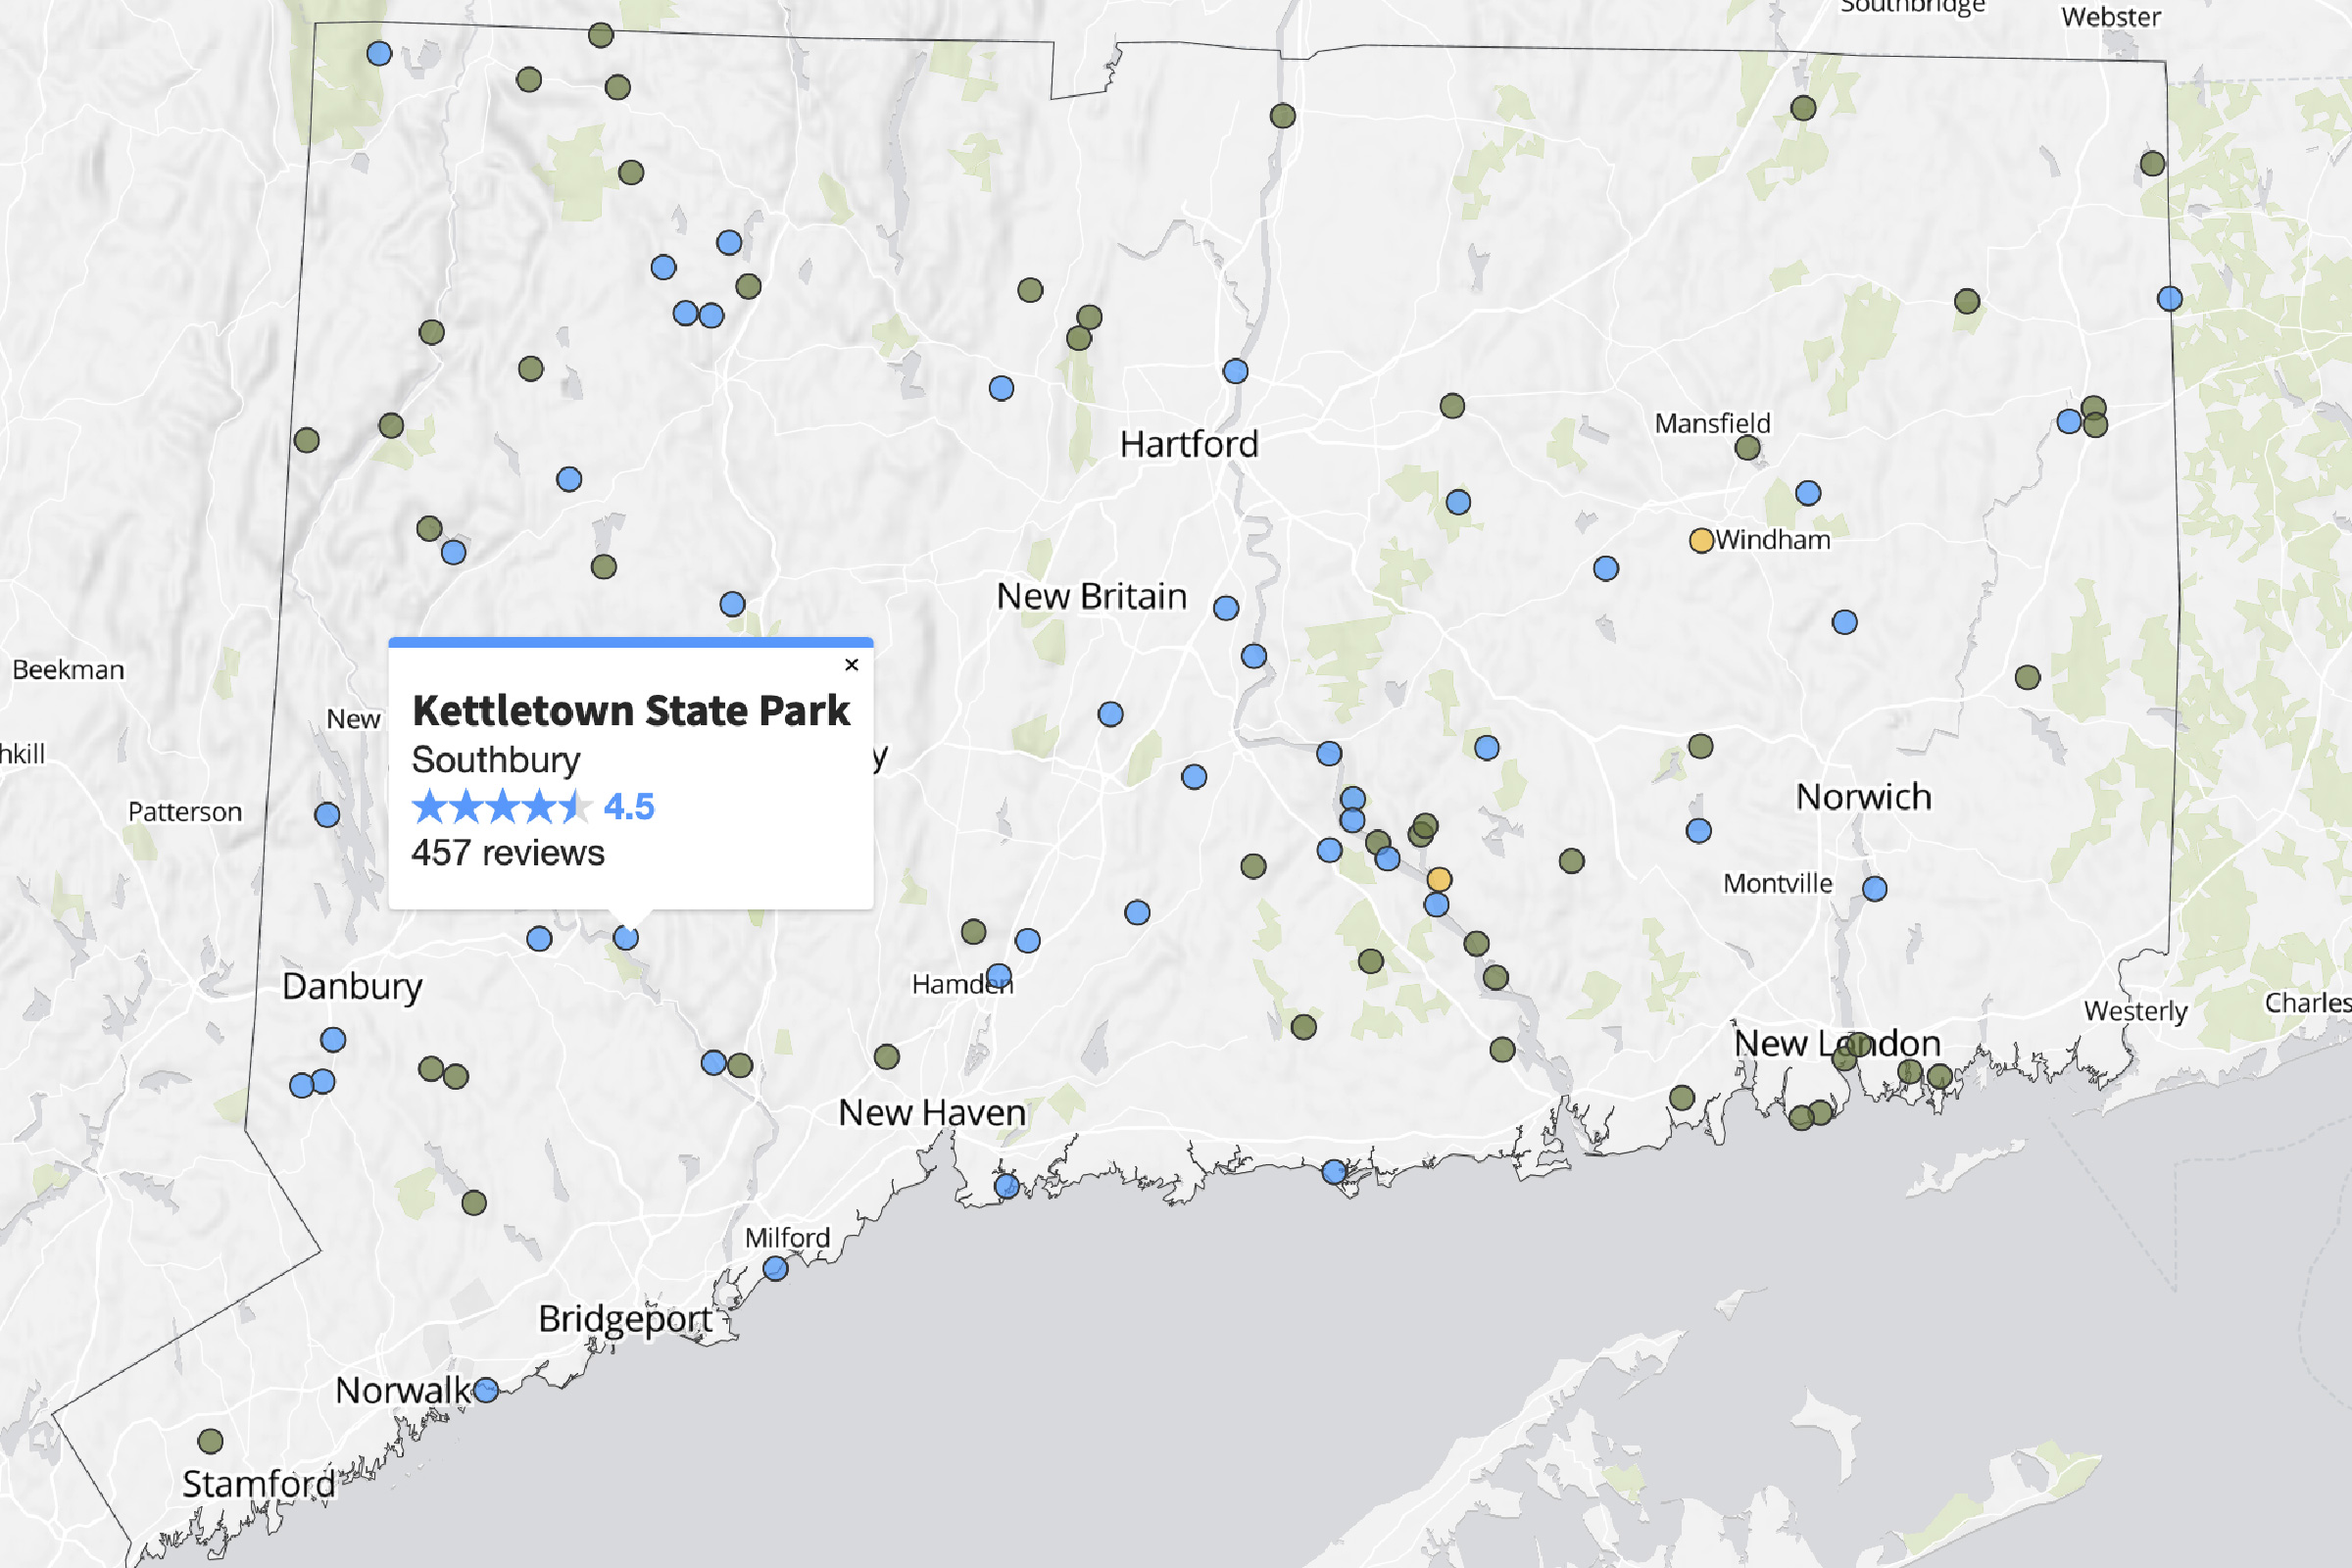 Interactive map showing CT's state parks and their Google Maps ratings.